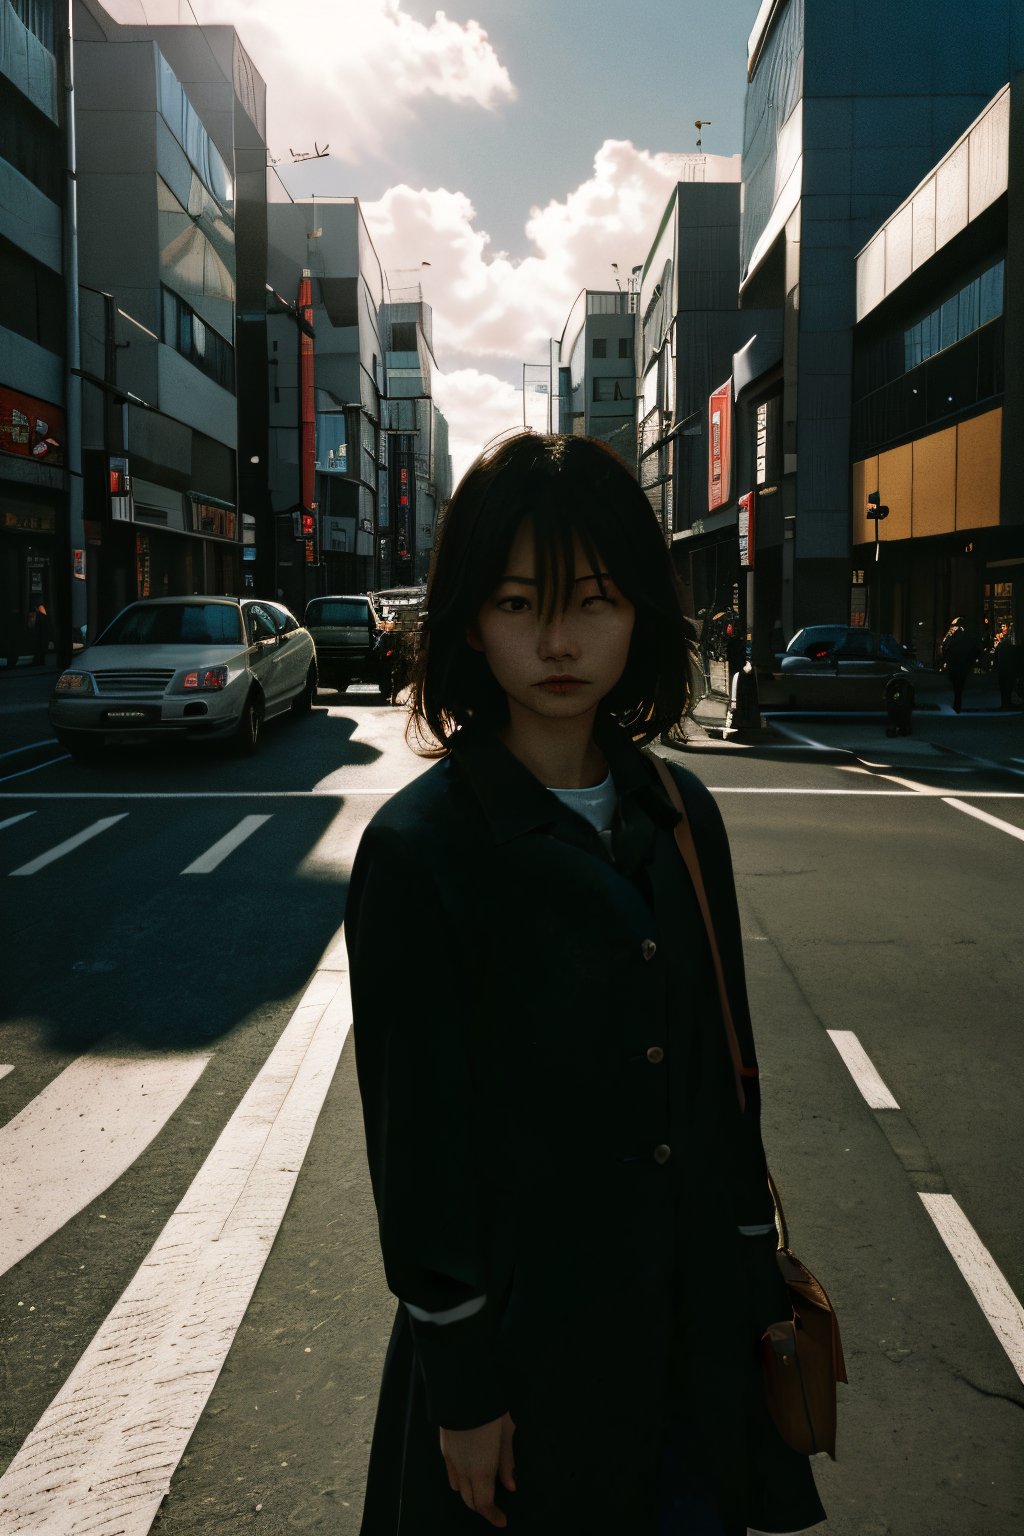 realistic,portrait,film grain,shadow,asian,woman,sunlight,day,epic,fantastic,street,messy hair,light,grainy,real photo,outdoor,grainy,lightshapes,cloudy color,japan,